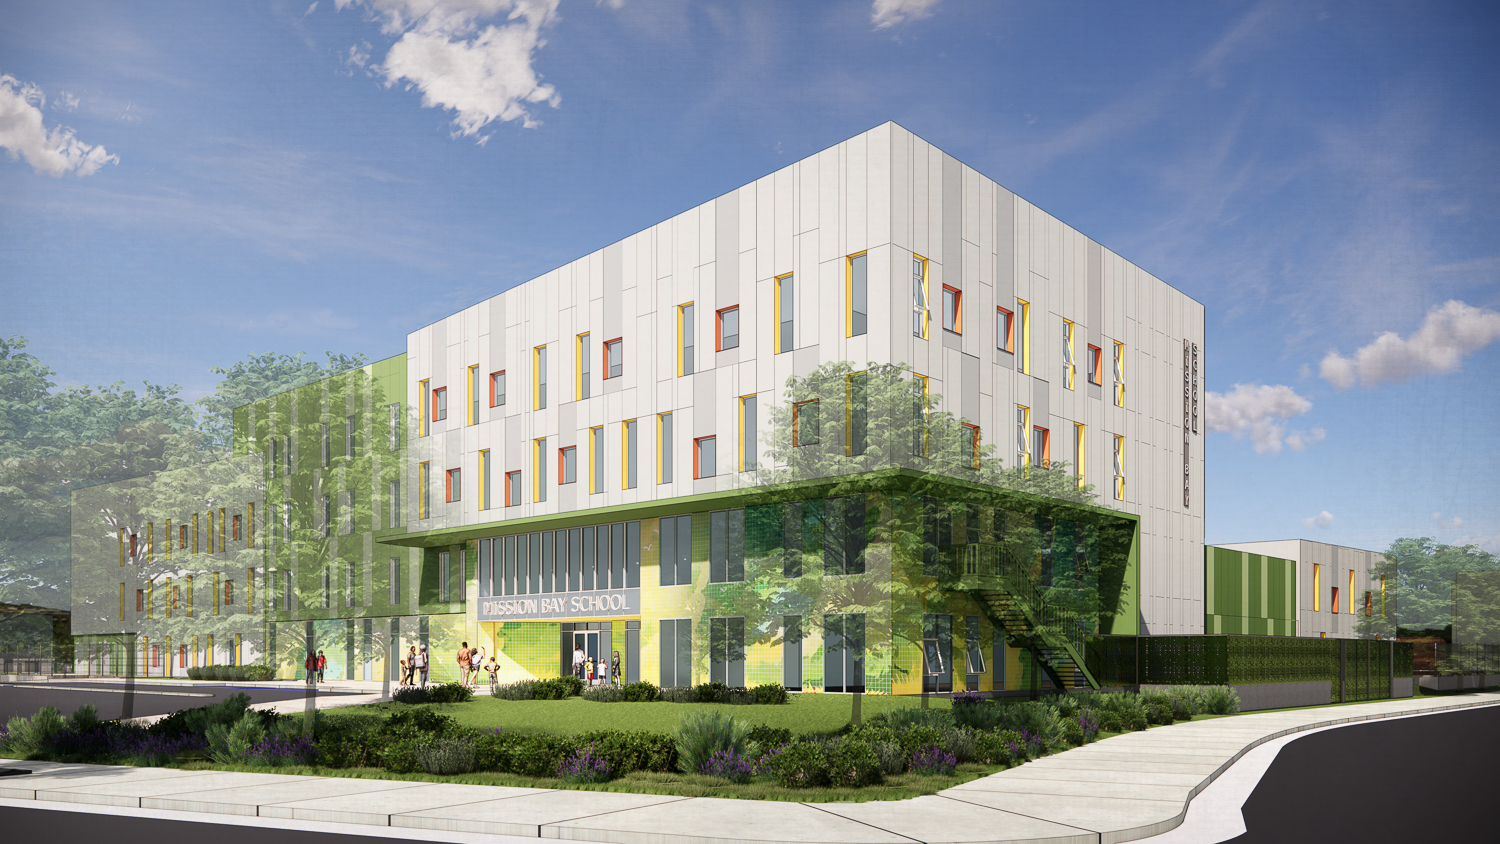 SFUSD Mission Bay School southwest view, rendering by DLR Group